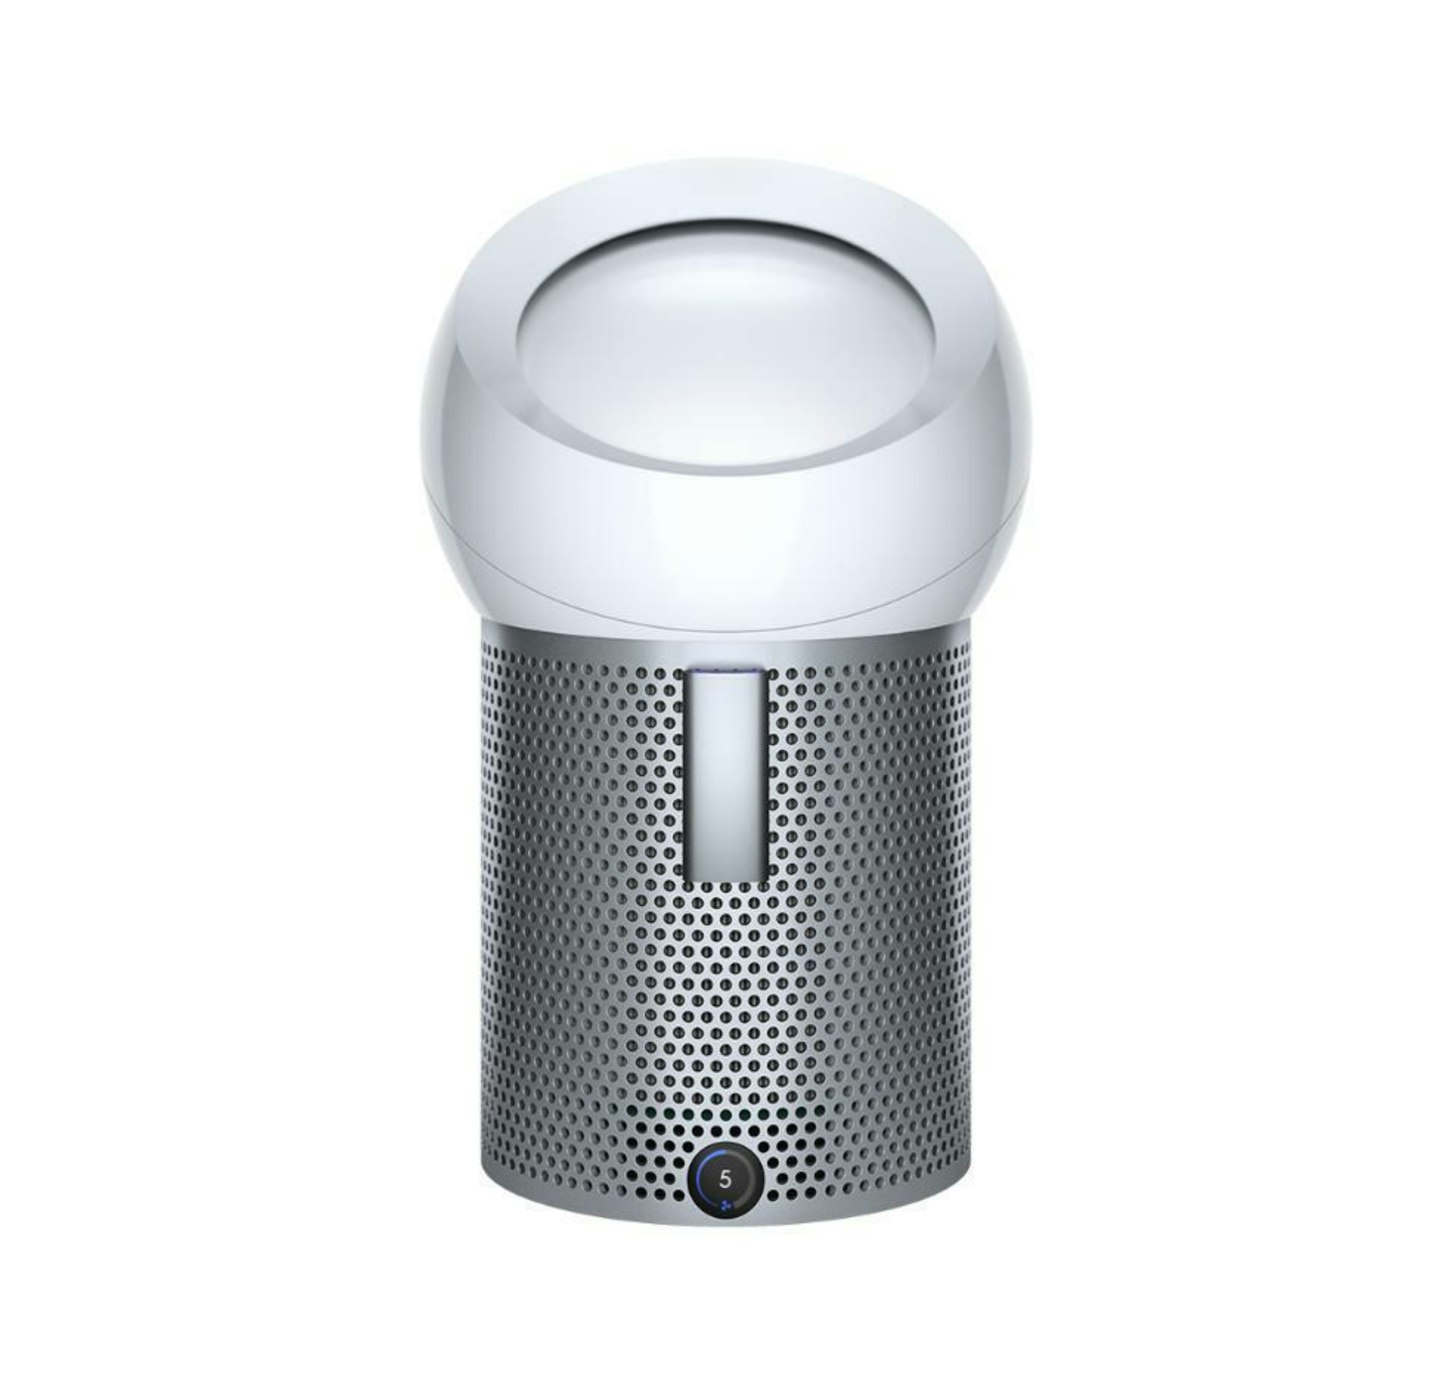 Dyson Pure Cool Me™ Personal Purifier - Refurbished